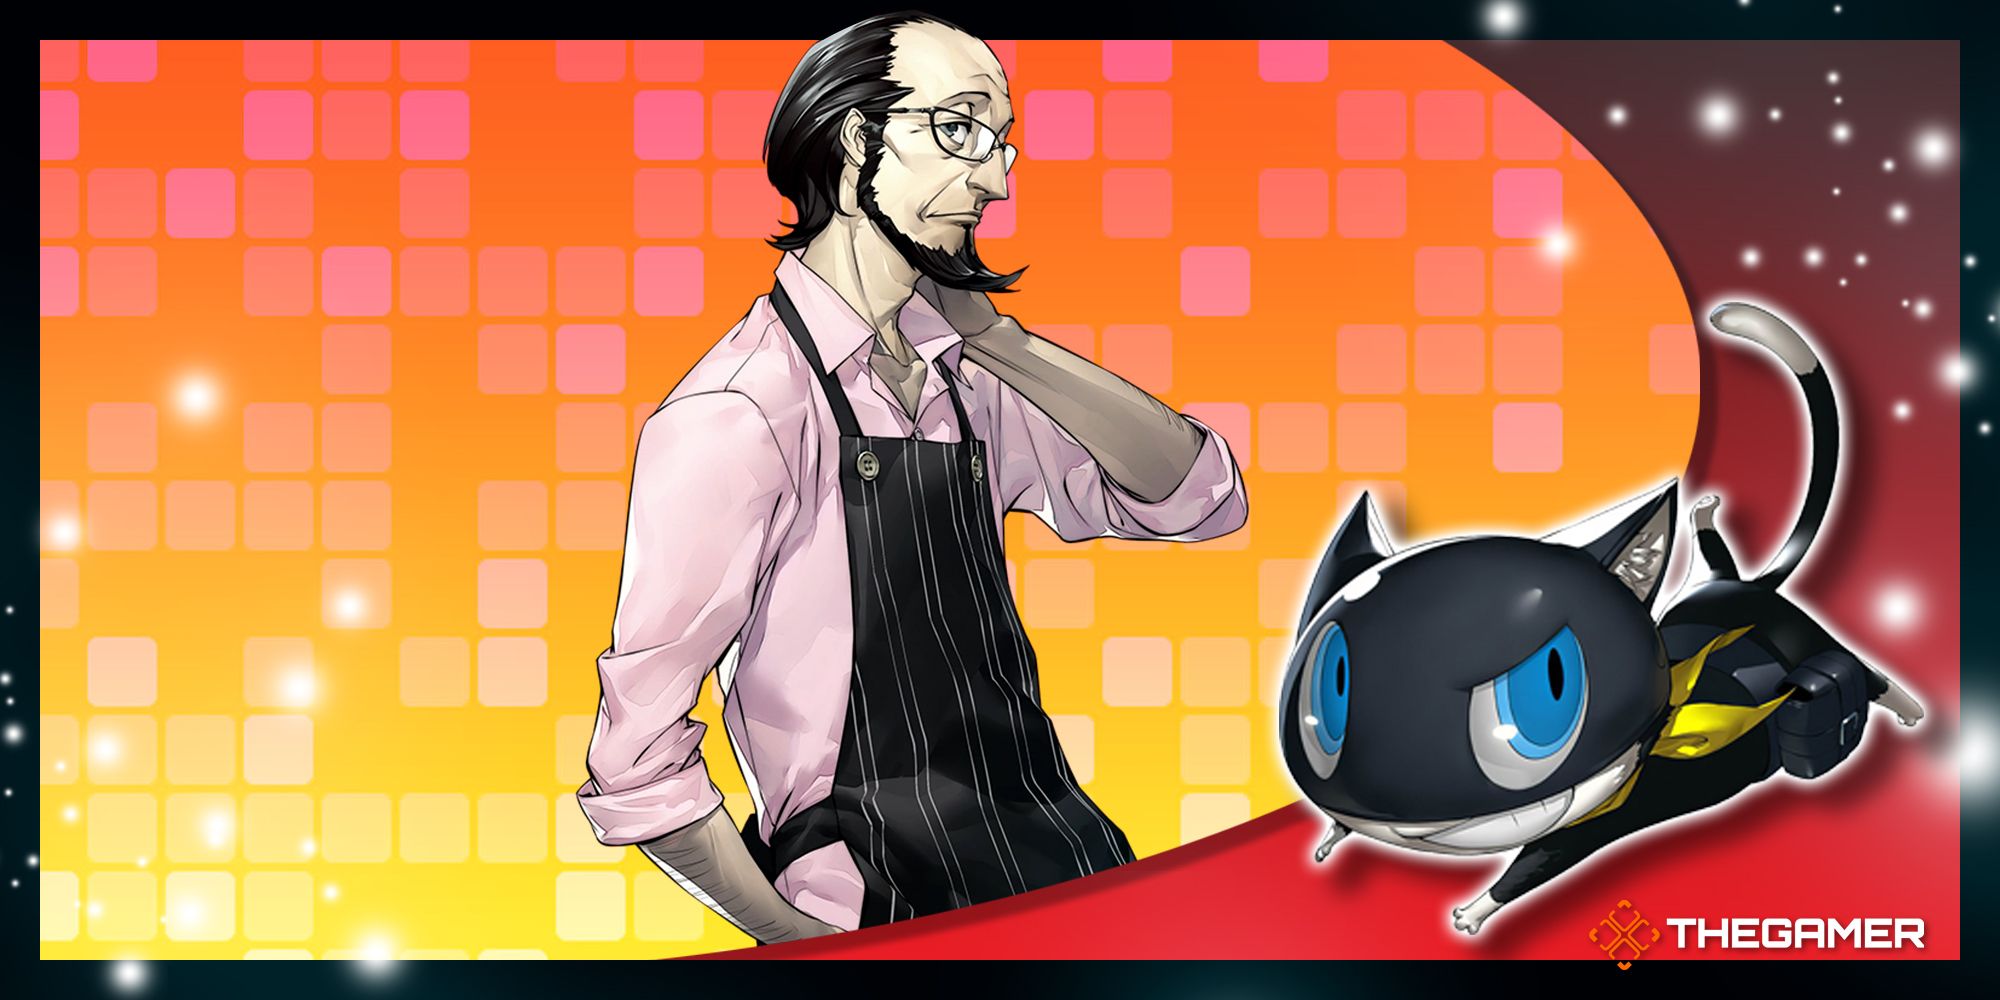 sojiro sakura on an orange and red background in our red p5r morgana frame for the sojiro confidant